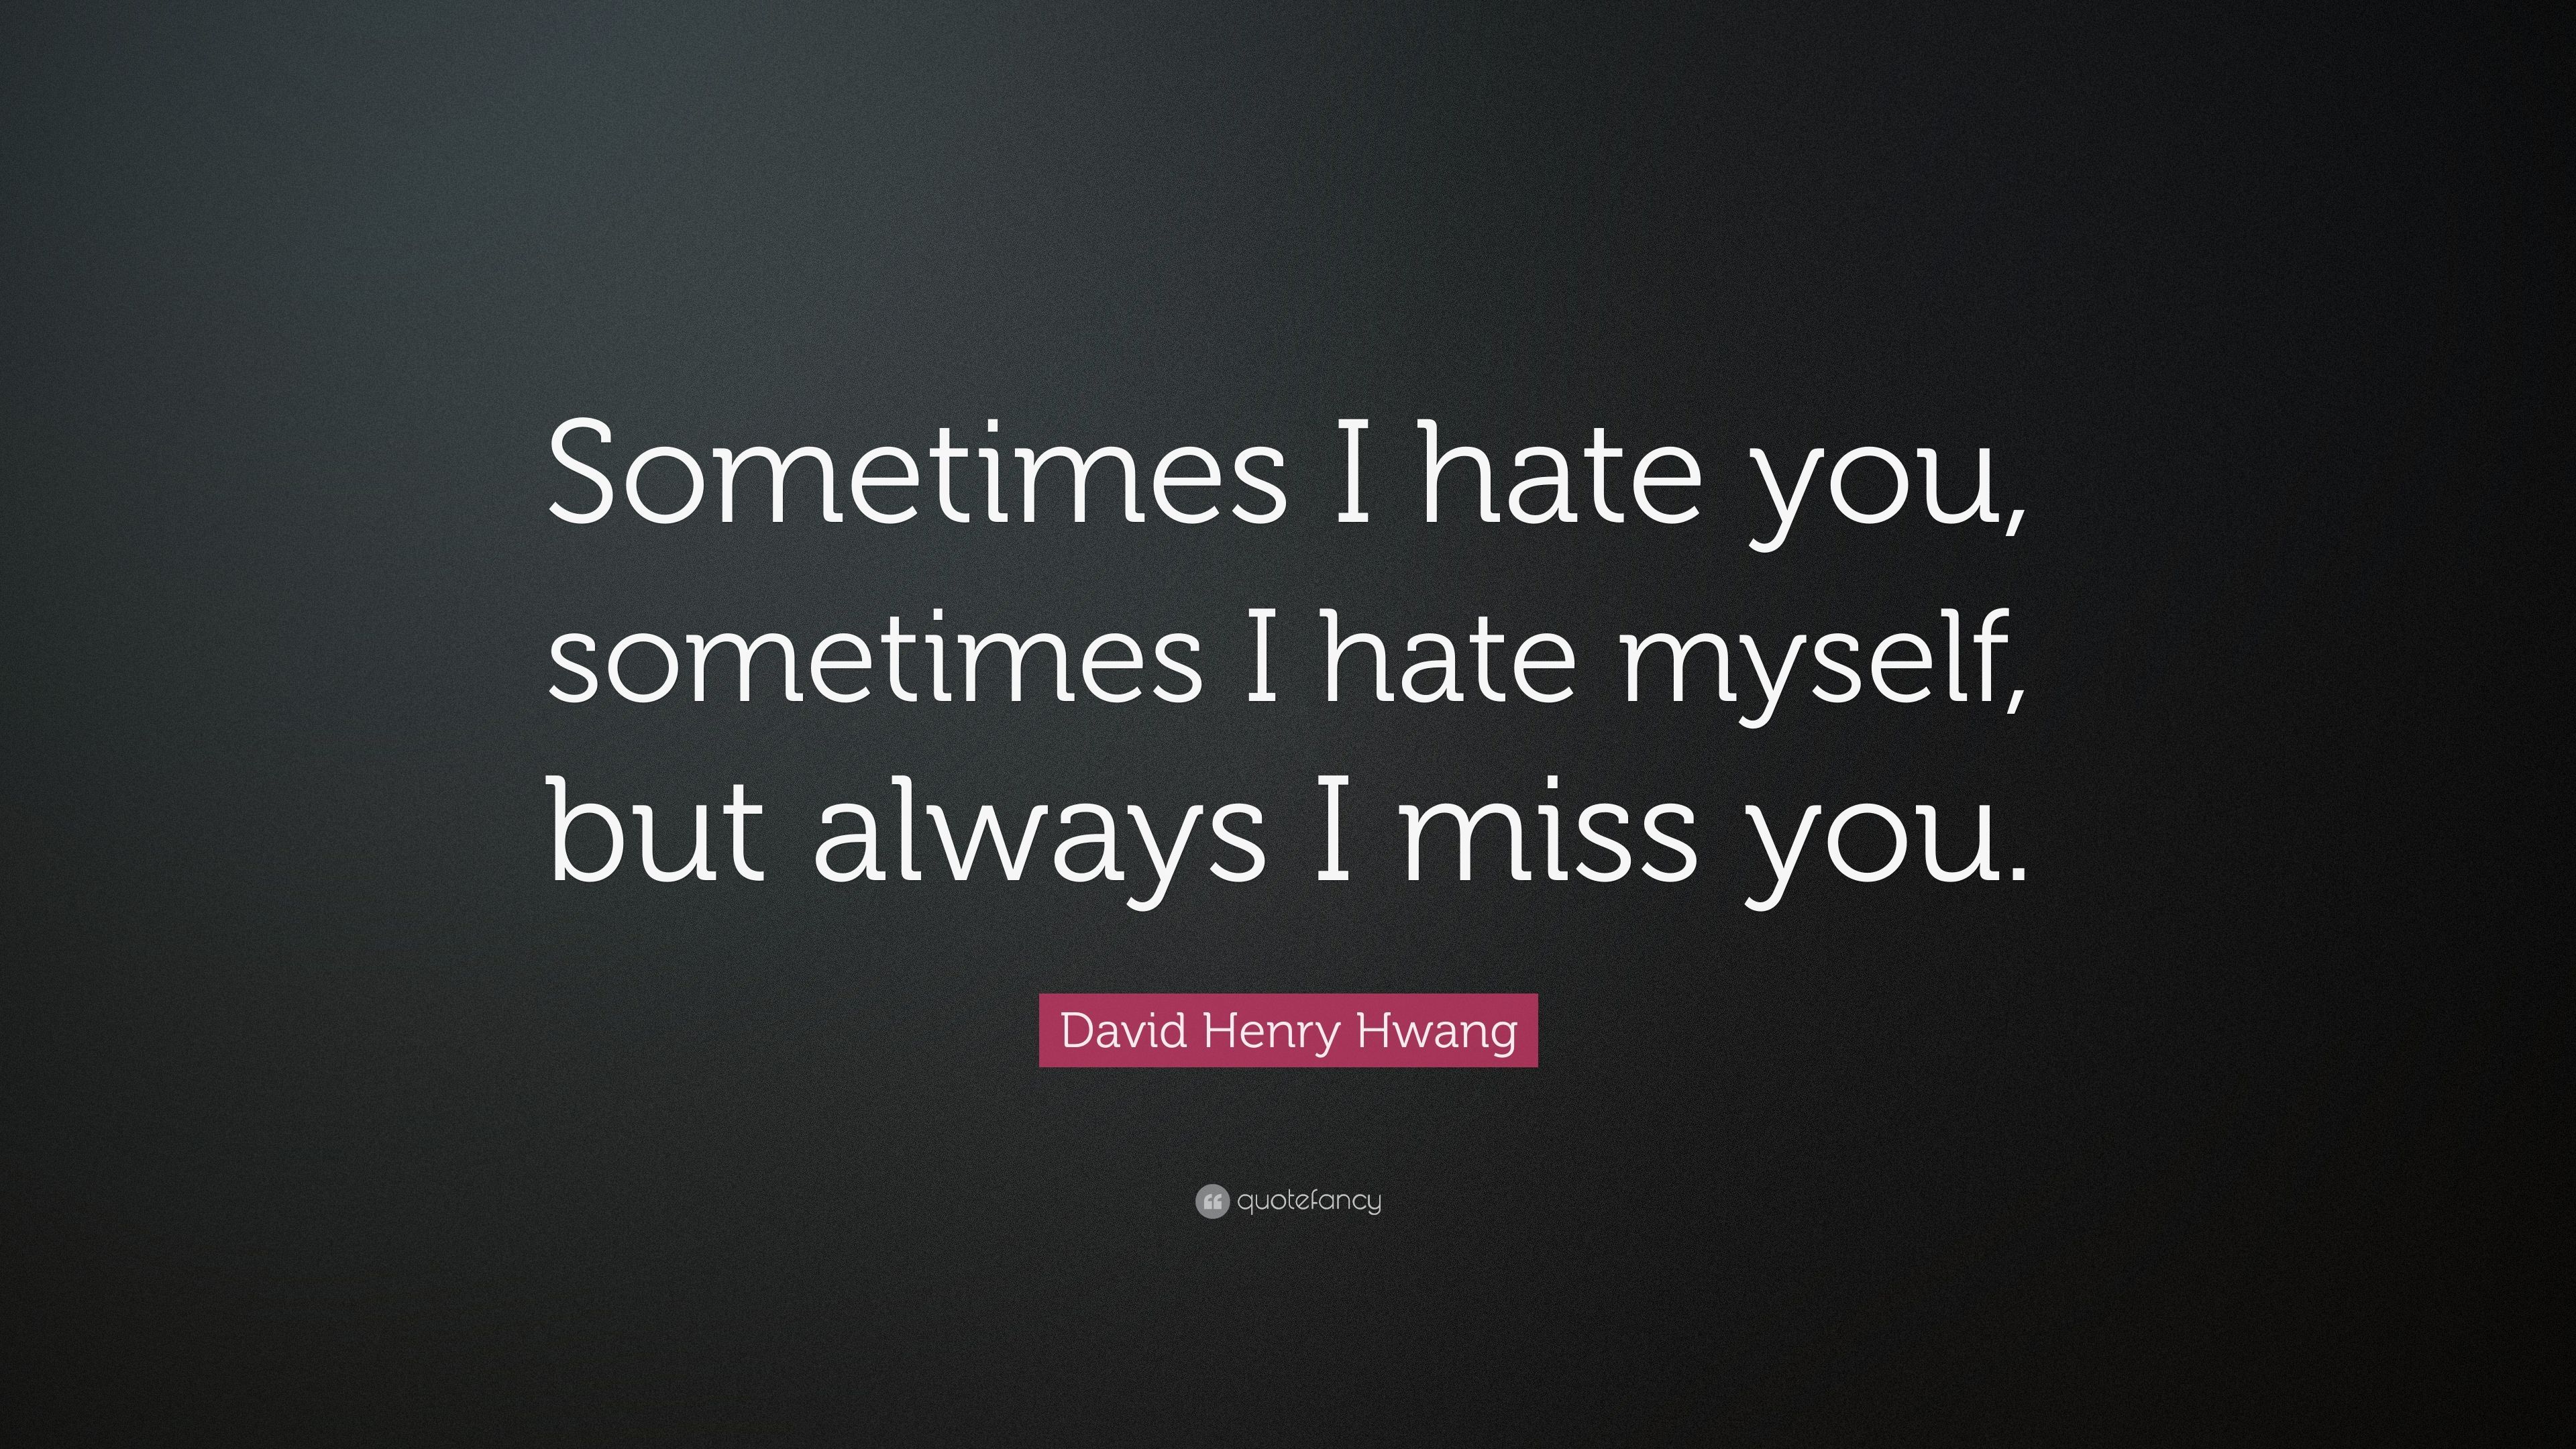 David Henry Hwang Quote: “Sometimes I hate you, sometimes I hate